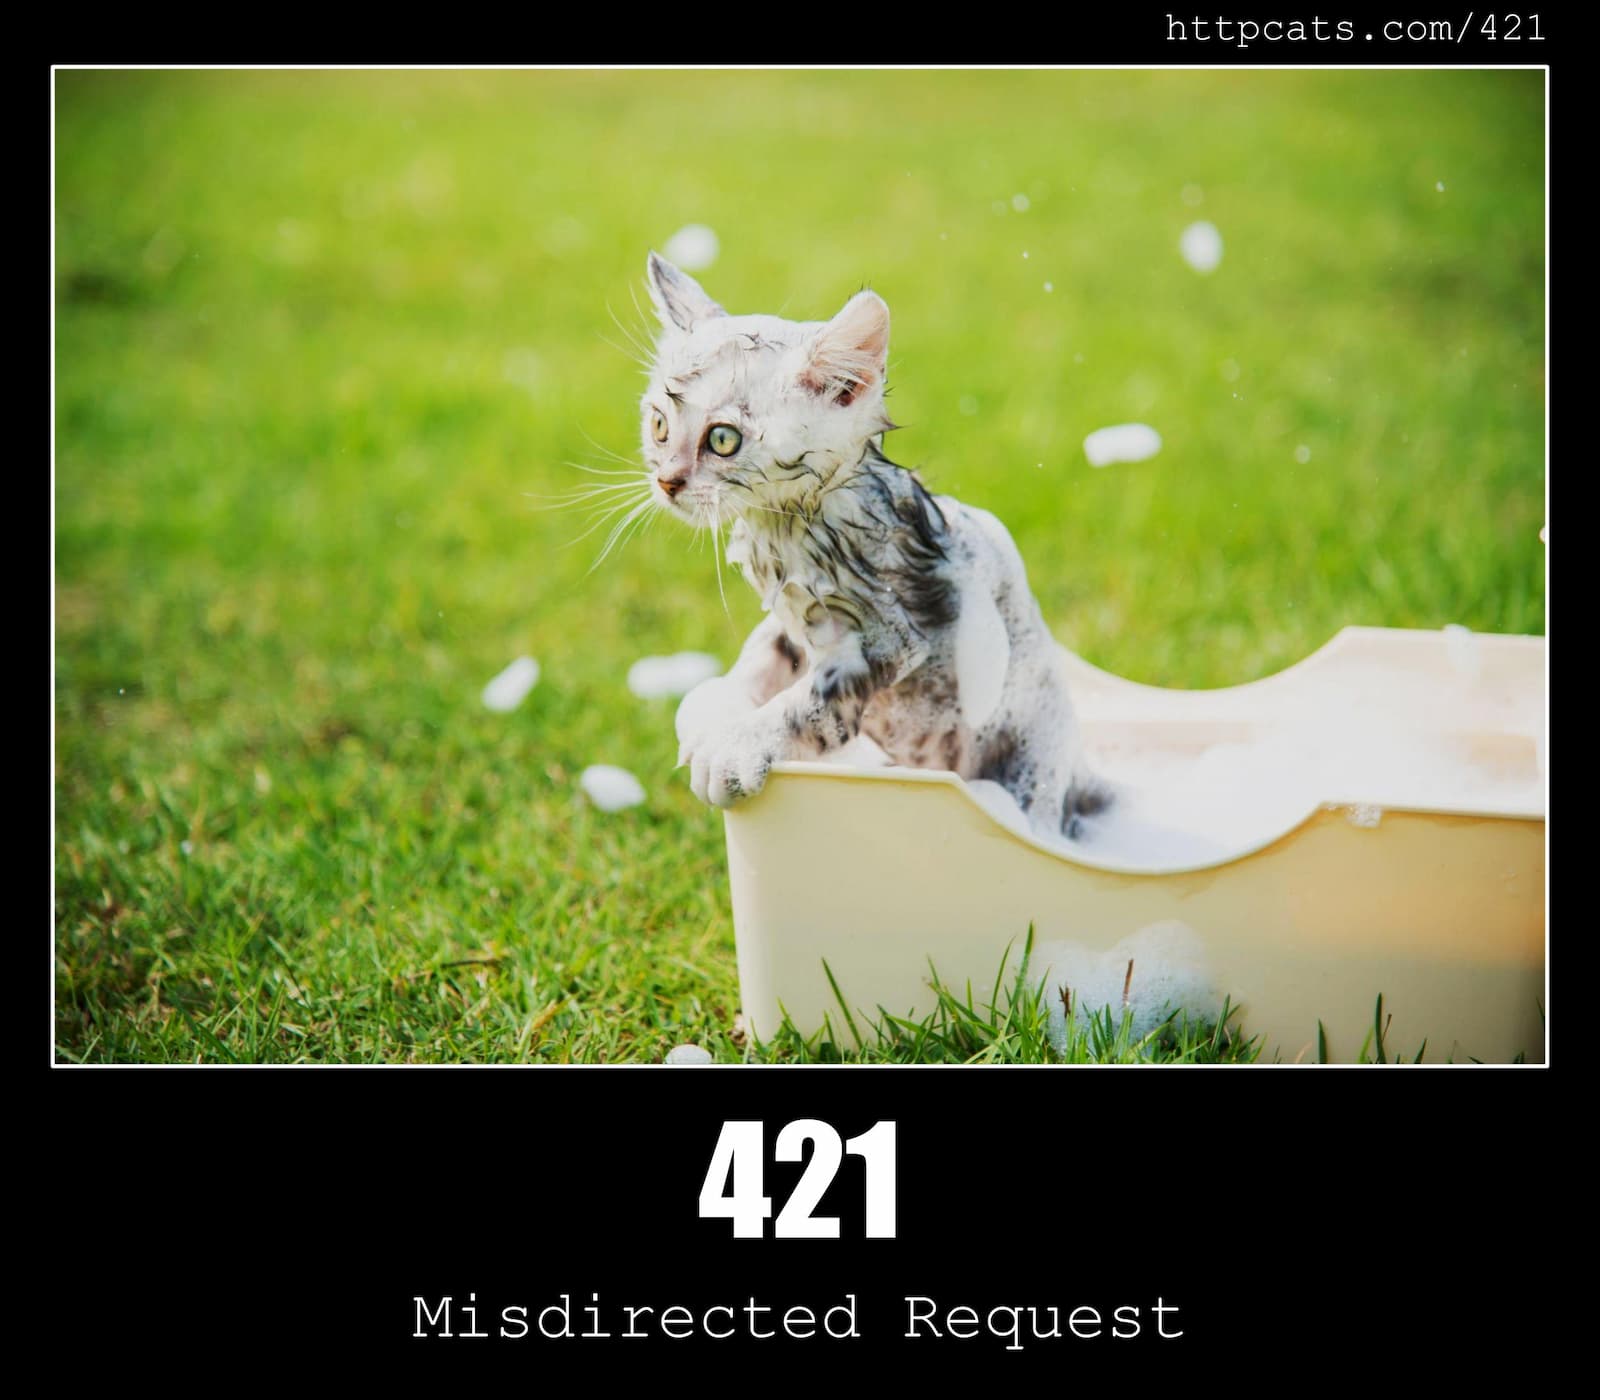 HTTP Status Code 421 Misdirected Request & Cats